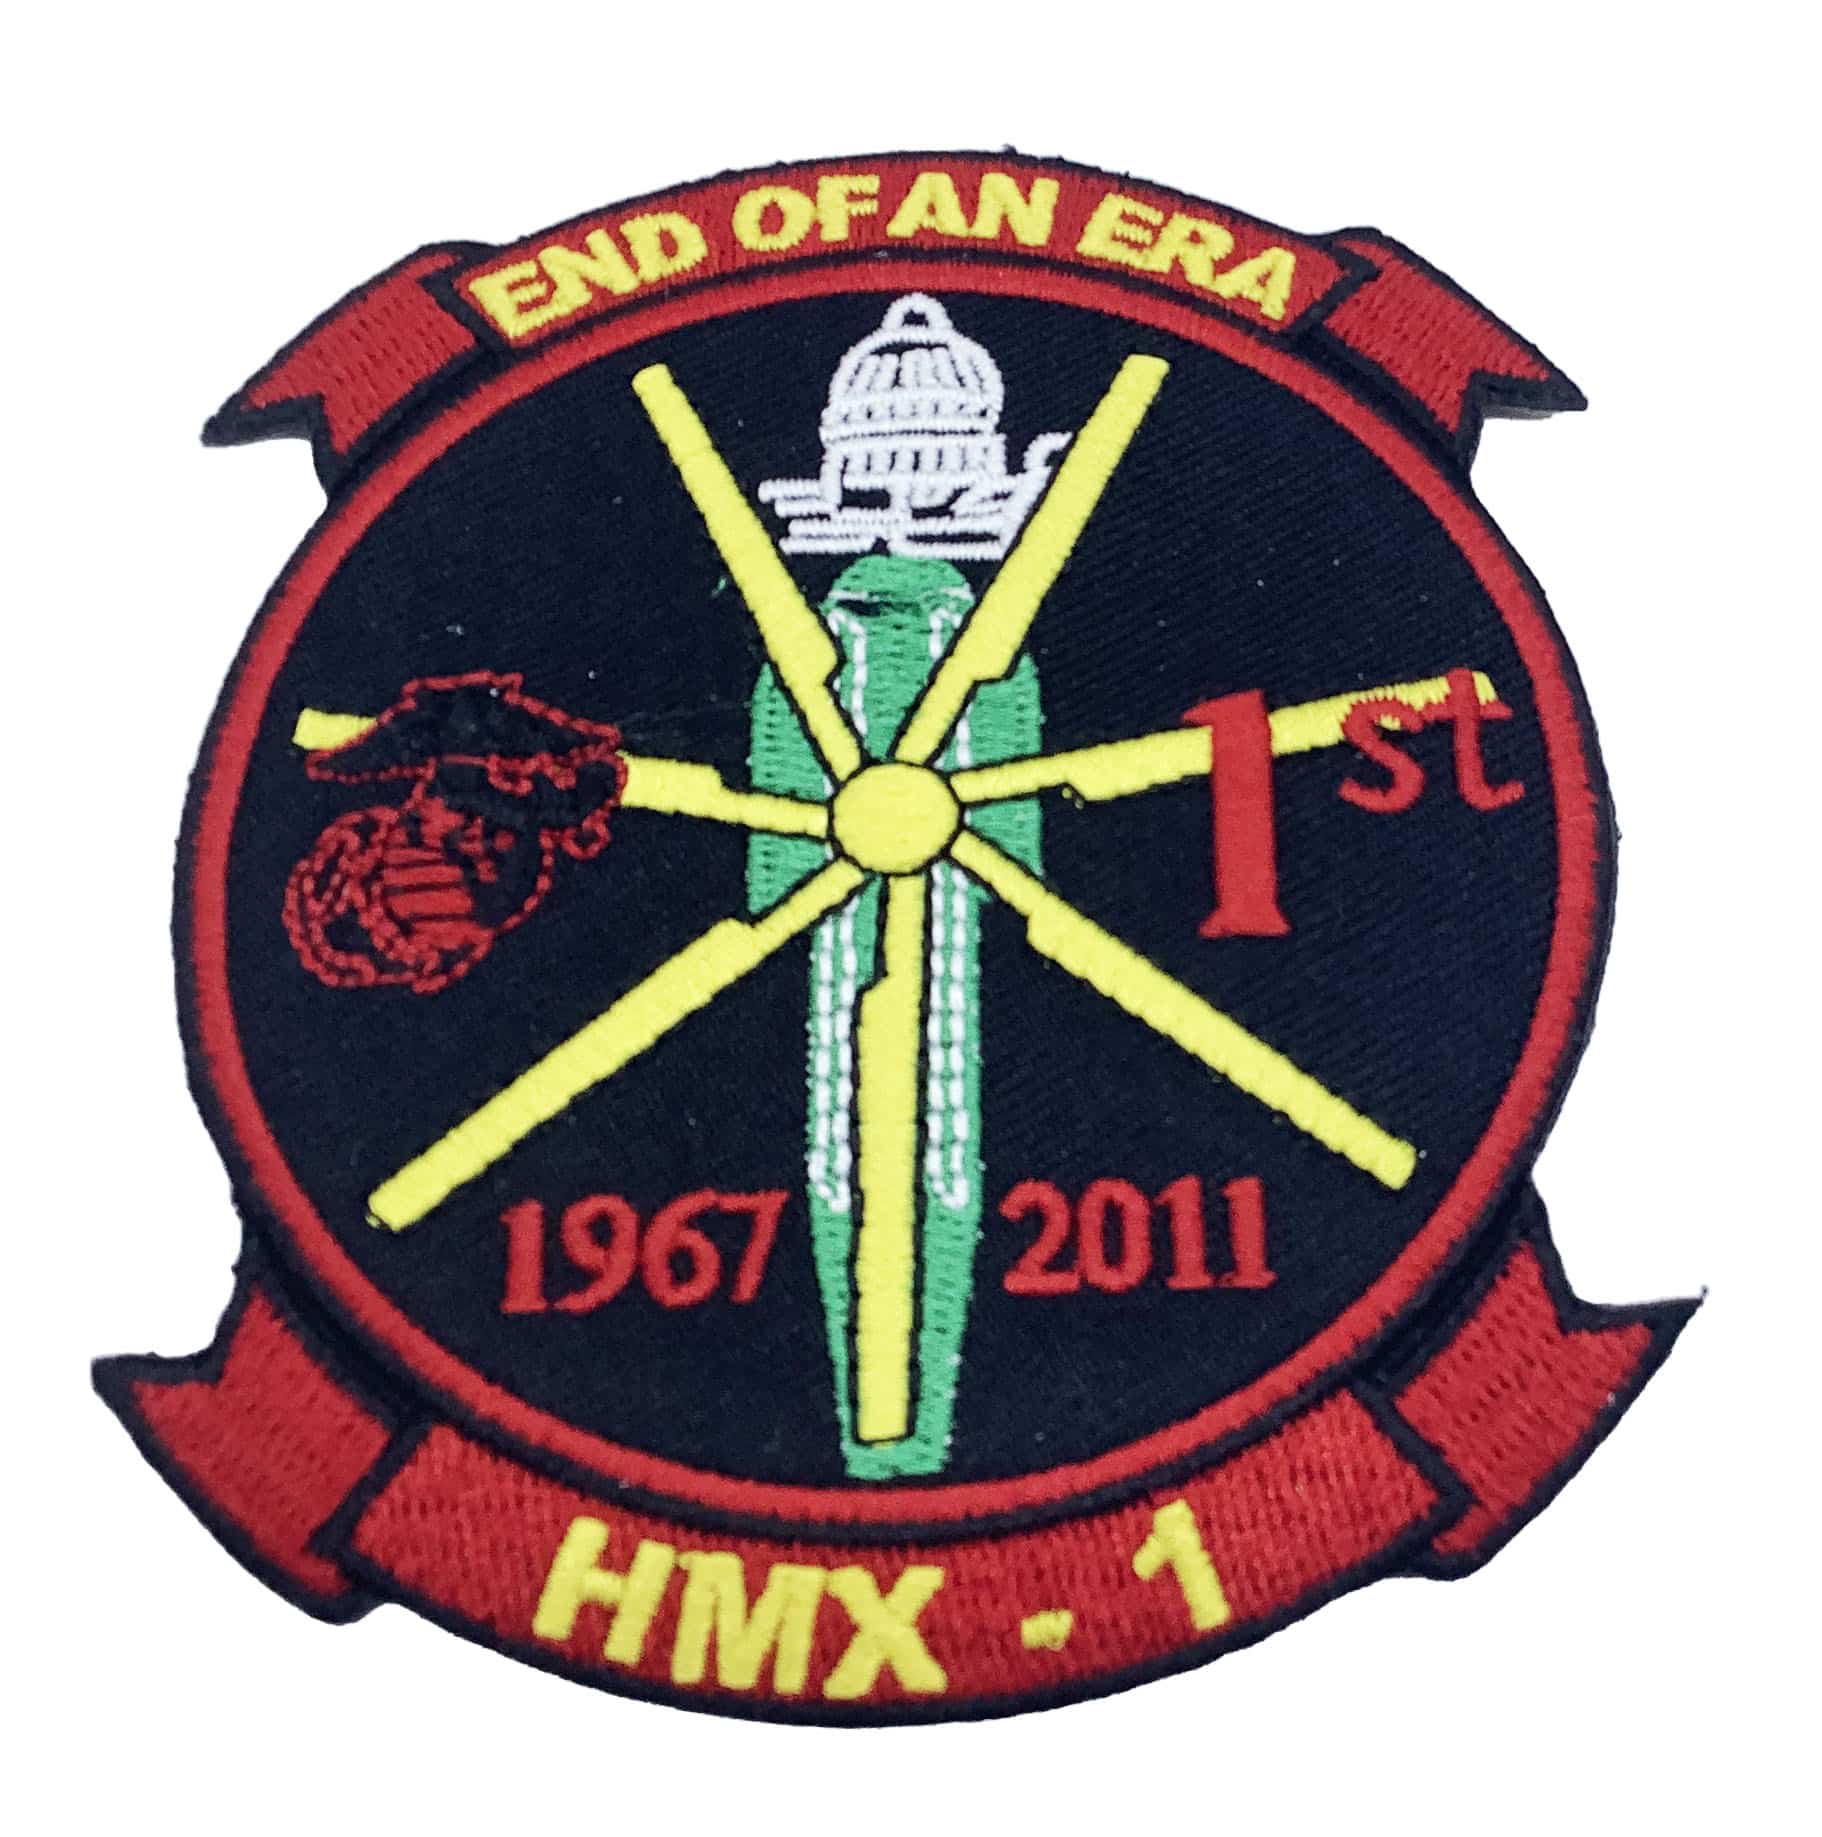 HMX-1 CH-53 End of an Era- No Hook and Loop